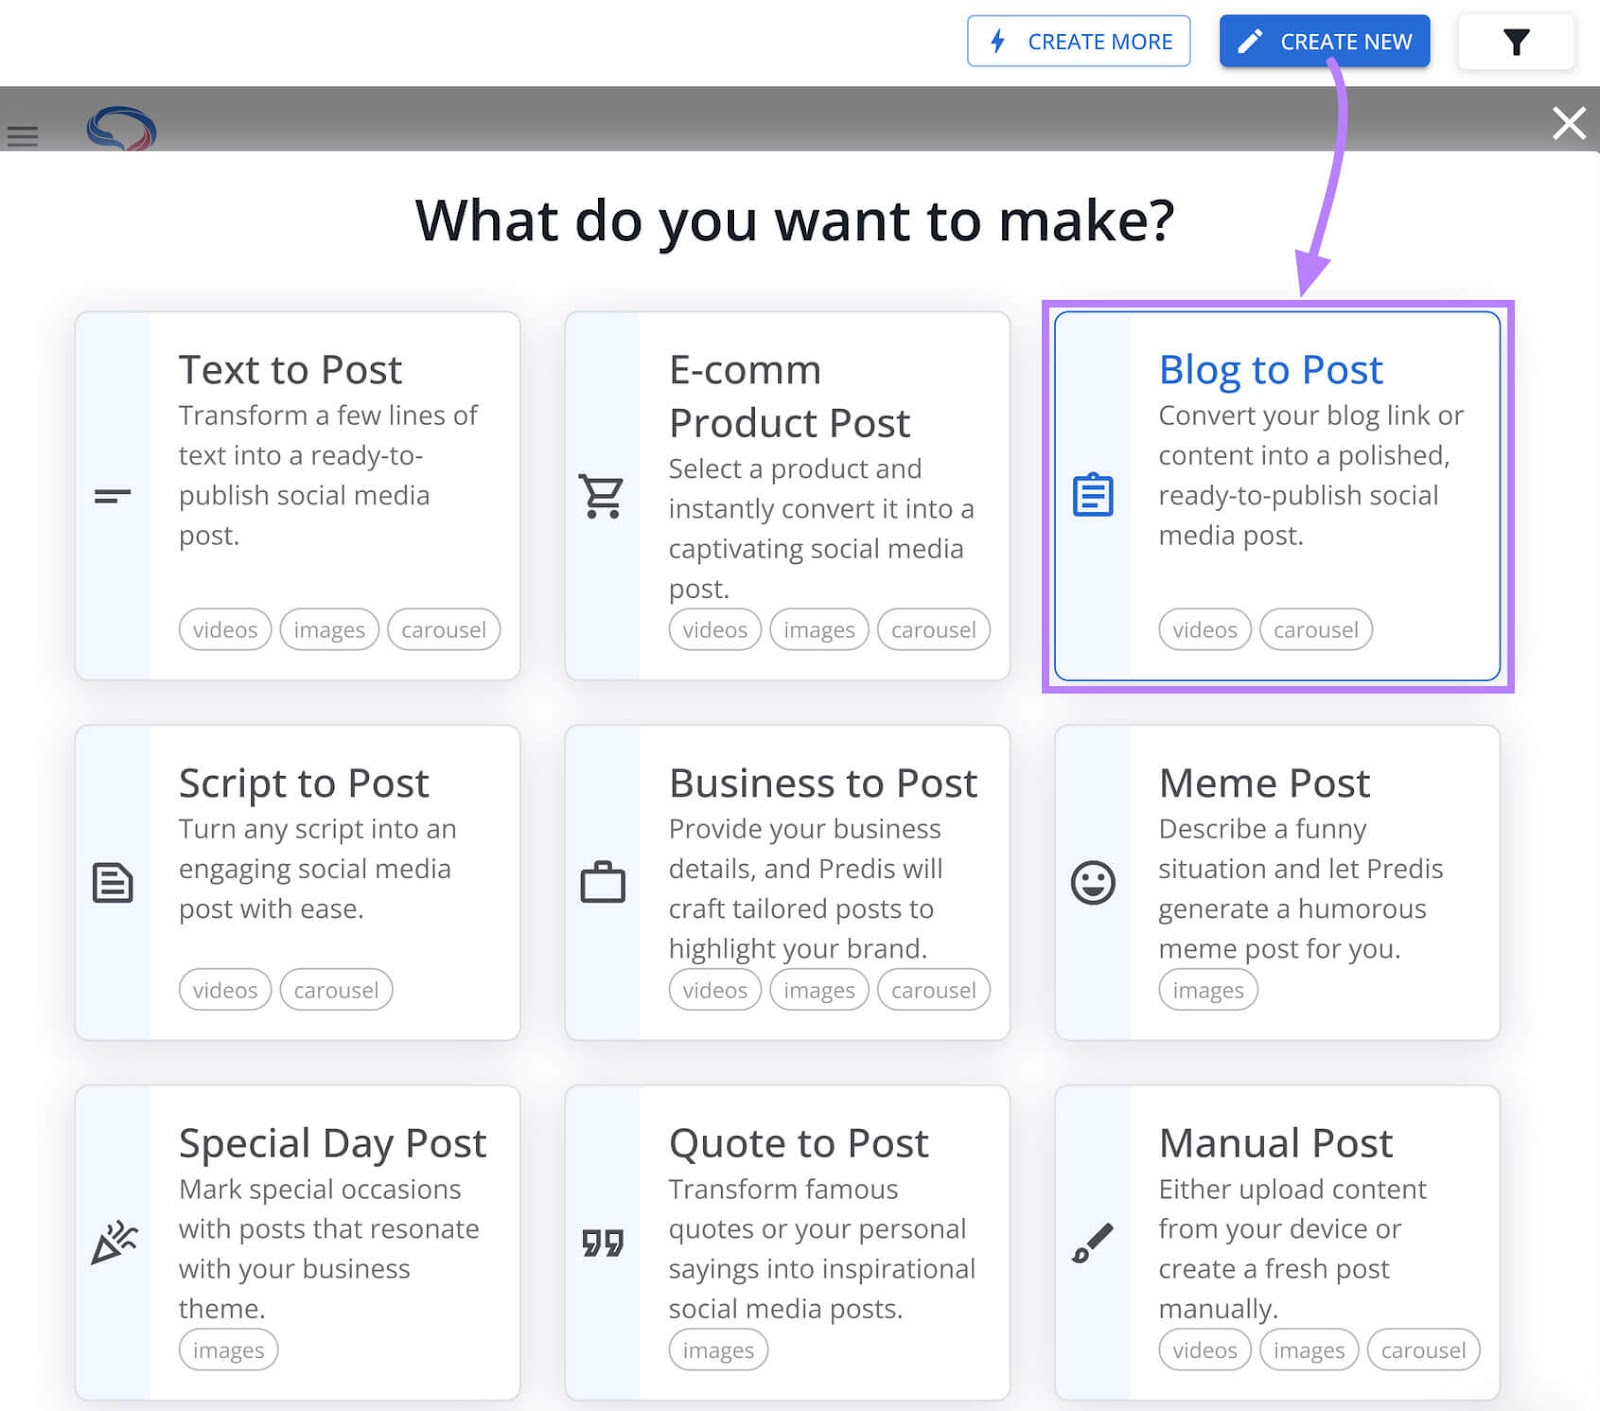 The "blog to post" option in AI Social Content Generator